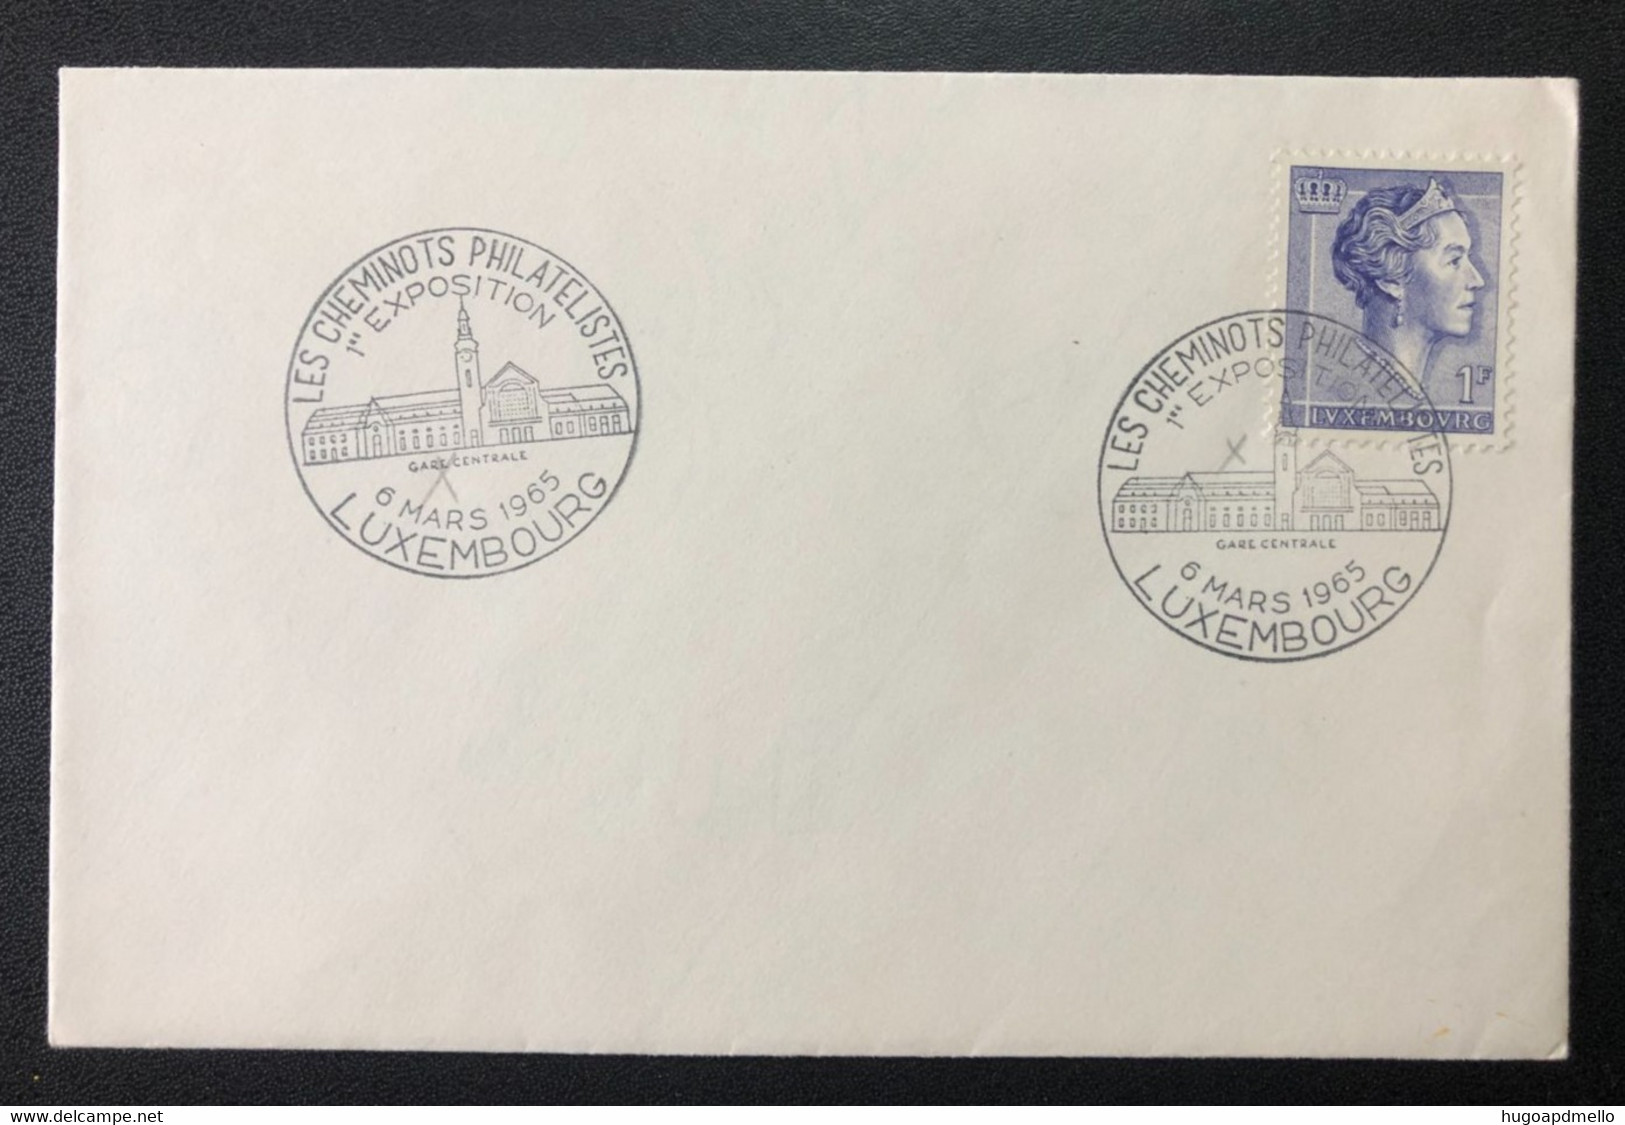 LUXEMBOURG, «1ère Exposition Les Cheminots Philatelistes »,  With Special Postmark, 1965 - Covers & Documents